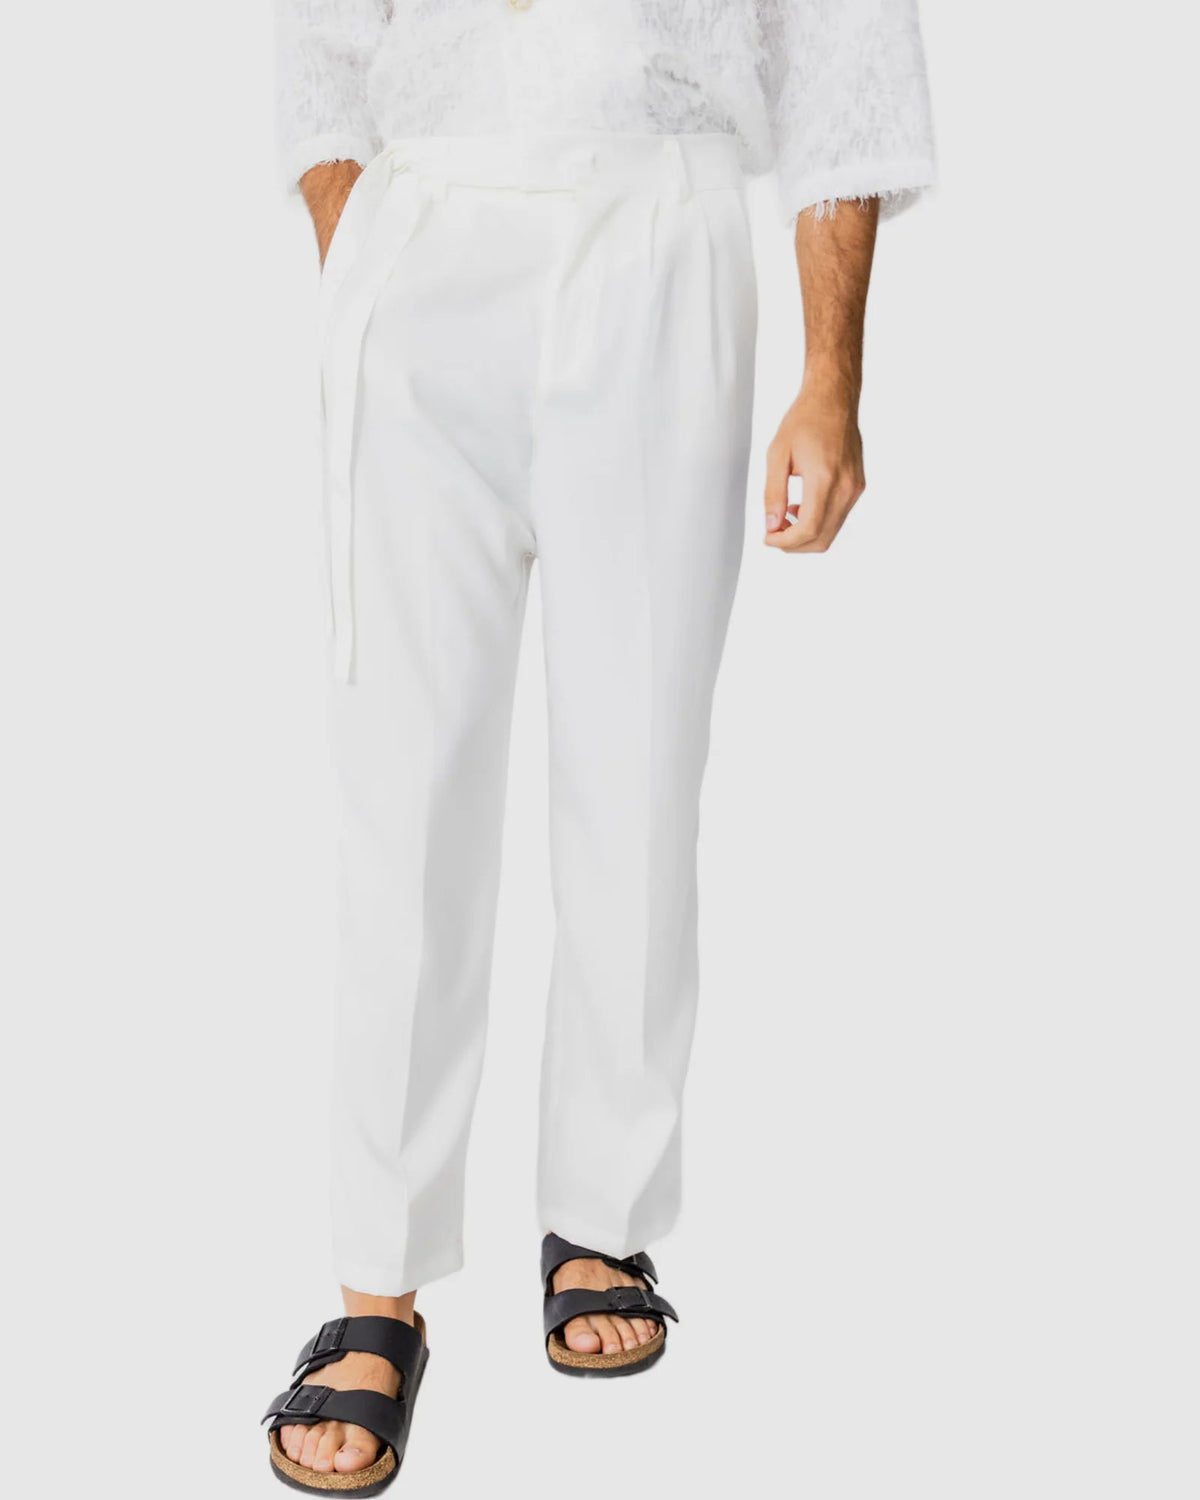 Justin Cassin Liberty Loose Tie Pants in White Color